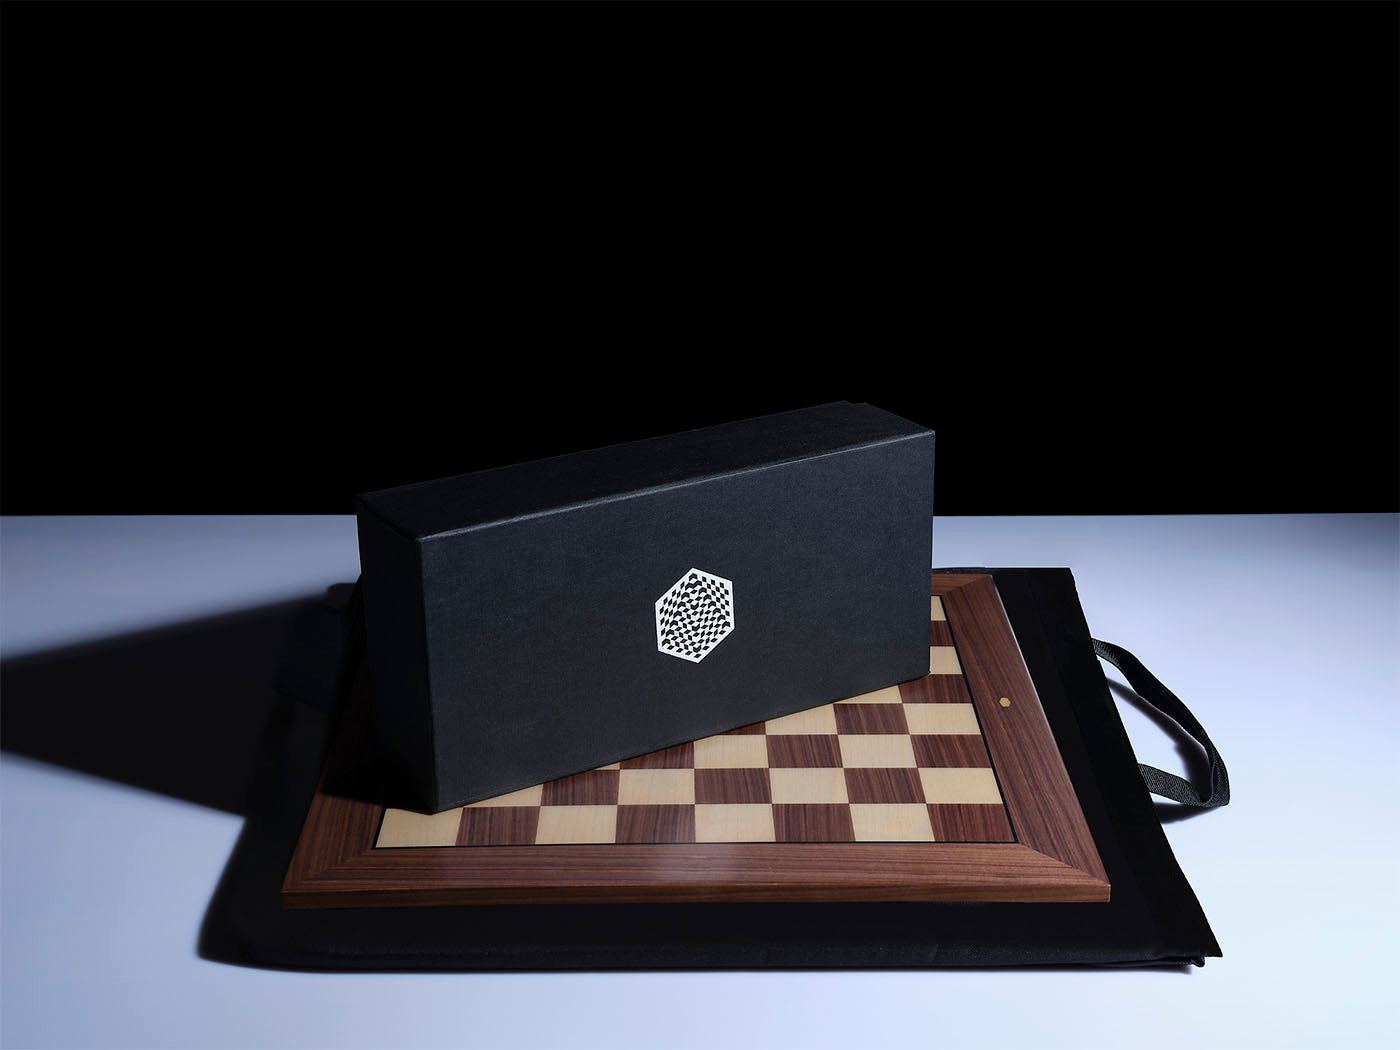 World Chess Championship Set (Wenge Board) - buy online with worldwide  shipping – World Chess Shop